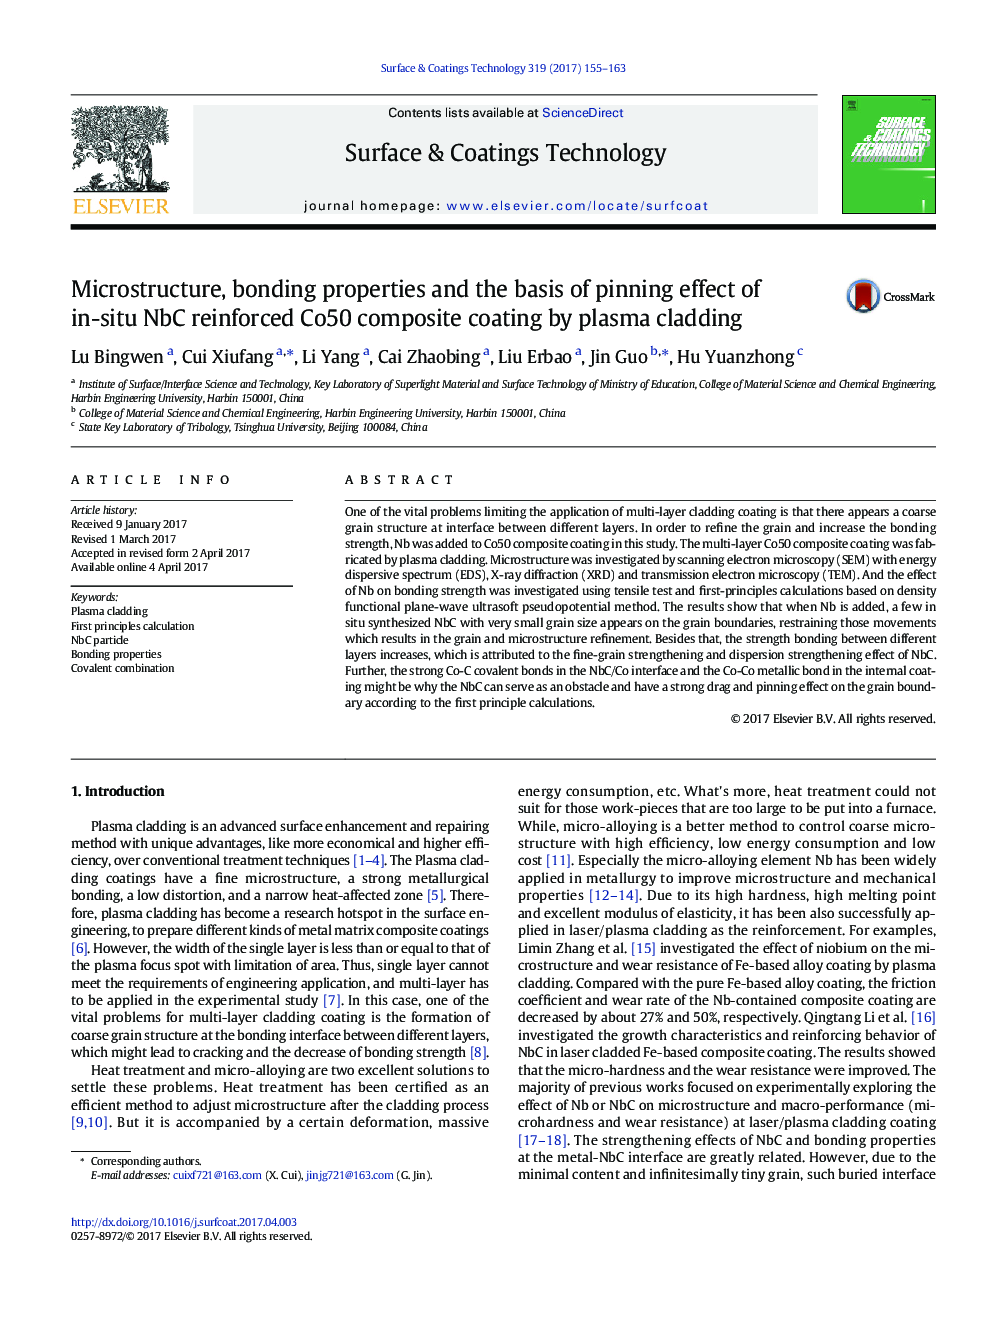 Microstructure, bonding properties and the basis of pinning effect of in-situ NbC reinforced Co50 composite coating by plasma cladding